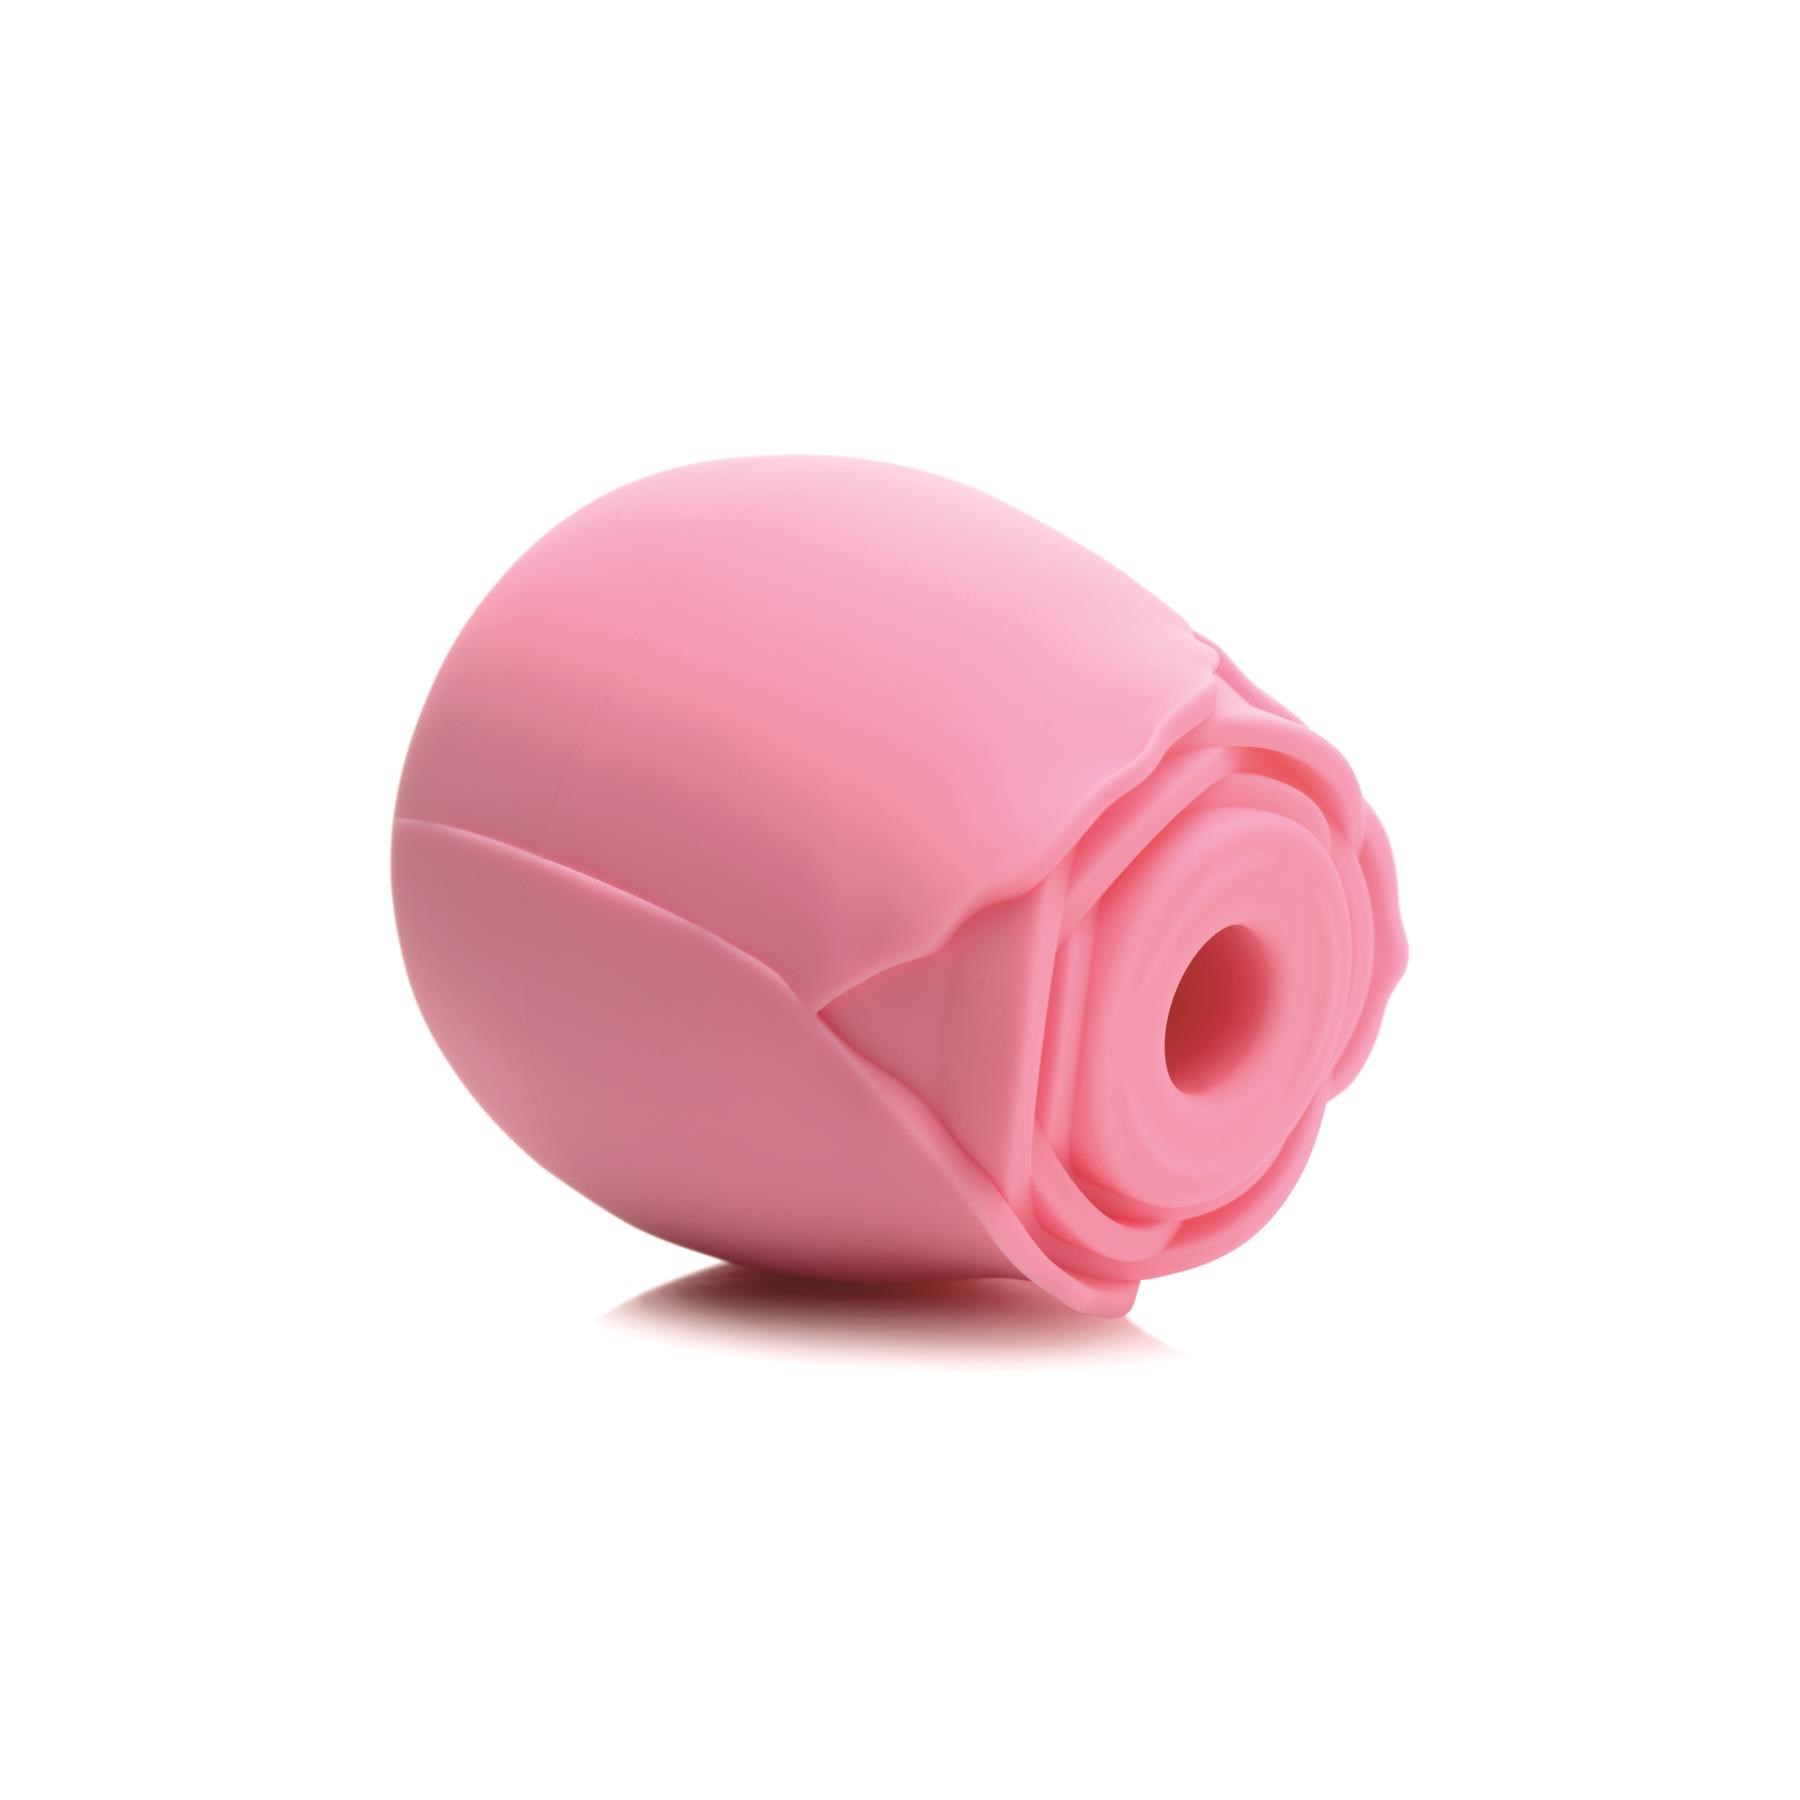 Bloomgasm Suction Rose Clitoral Stimulator To the Side - Pink